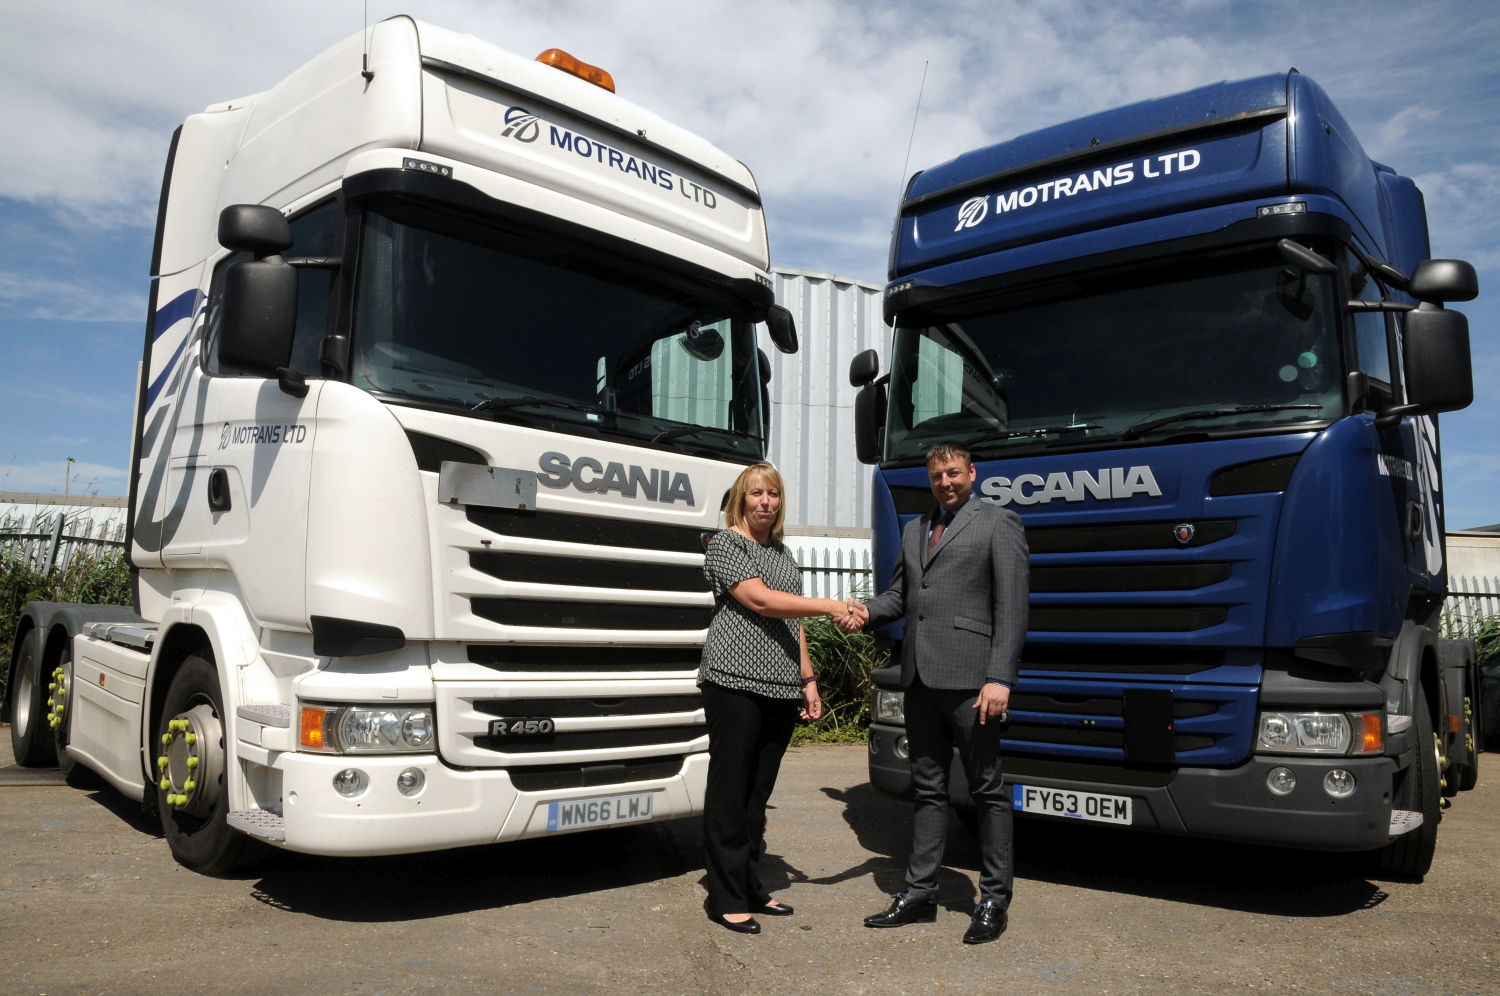 Man and woman shaking hands in front of two Scania trucks. Truck to the far right is dark blue and the other one is white.